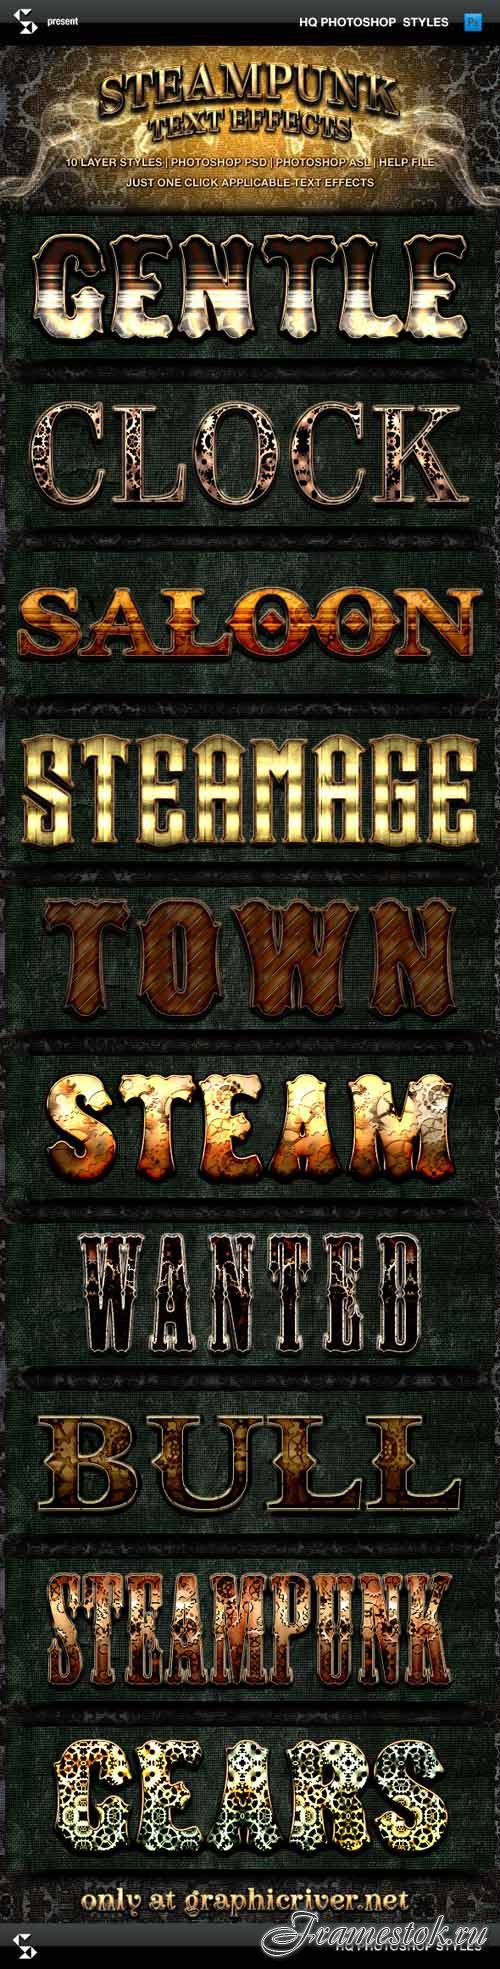 Graphicriver - Steampunk Text Effects 9020781